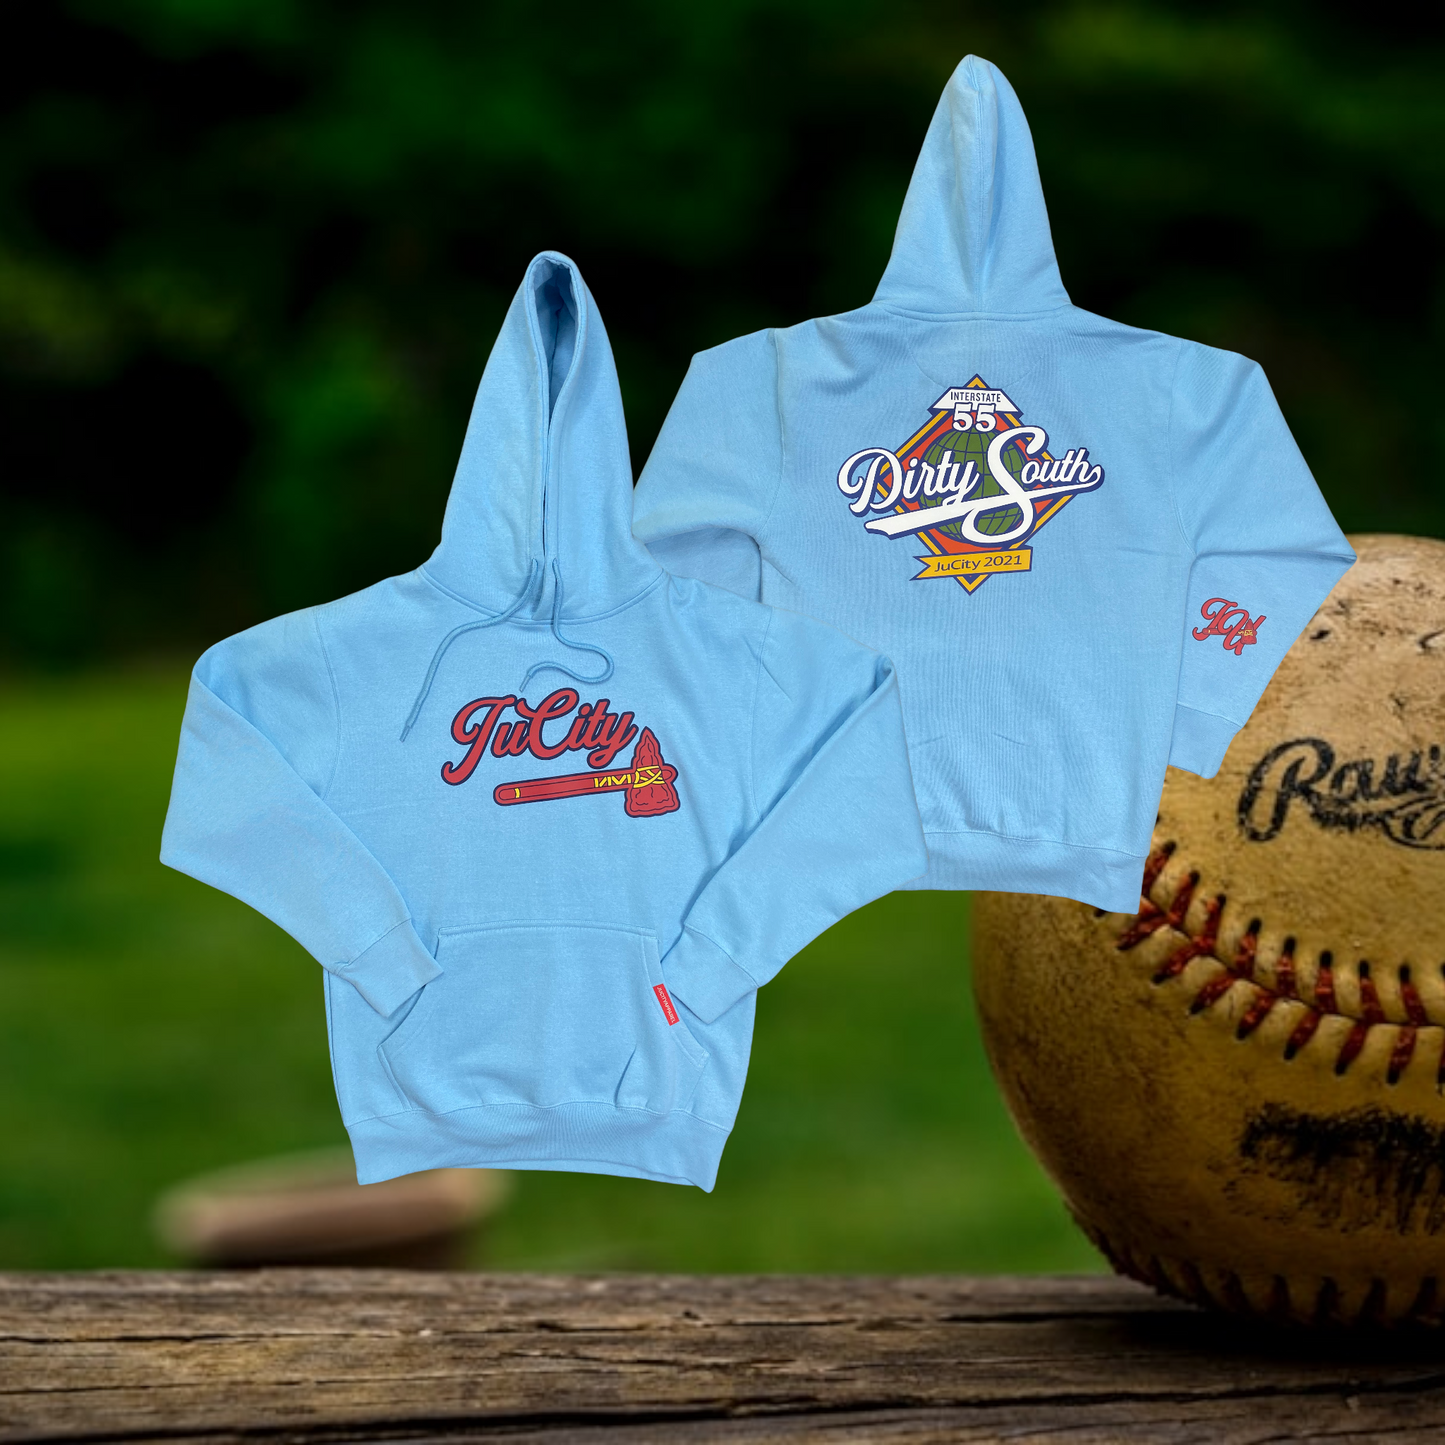 “BRAVES COLLECTION” HOODIES